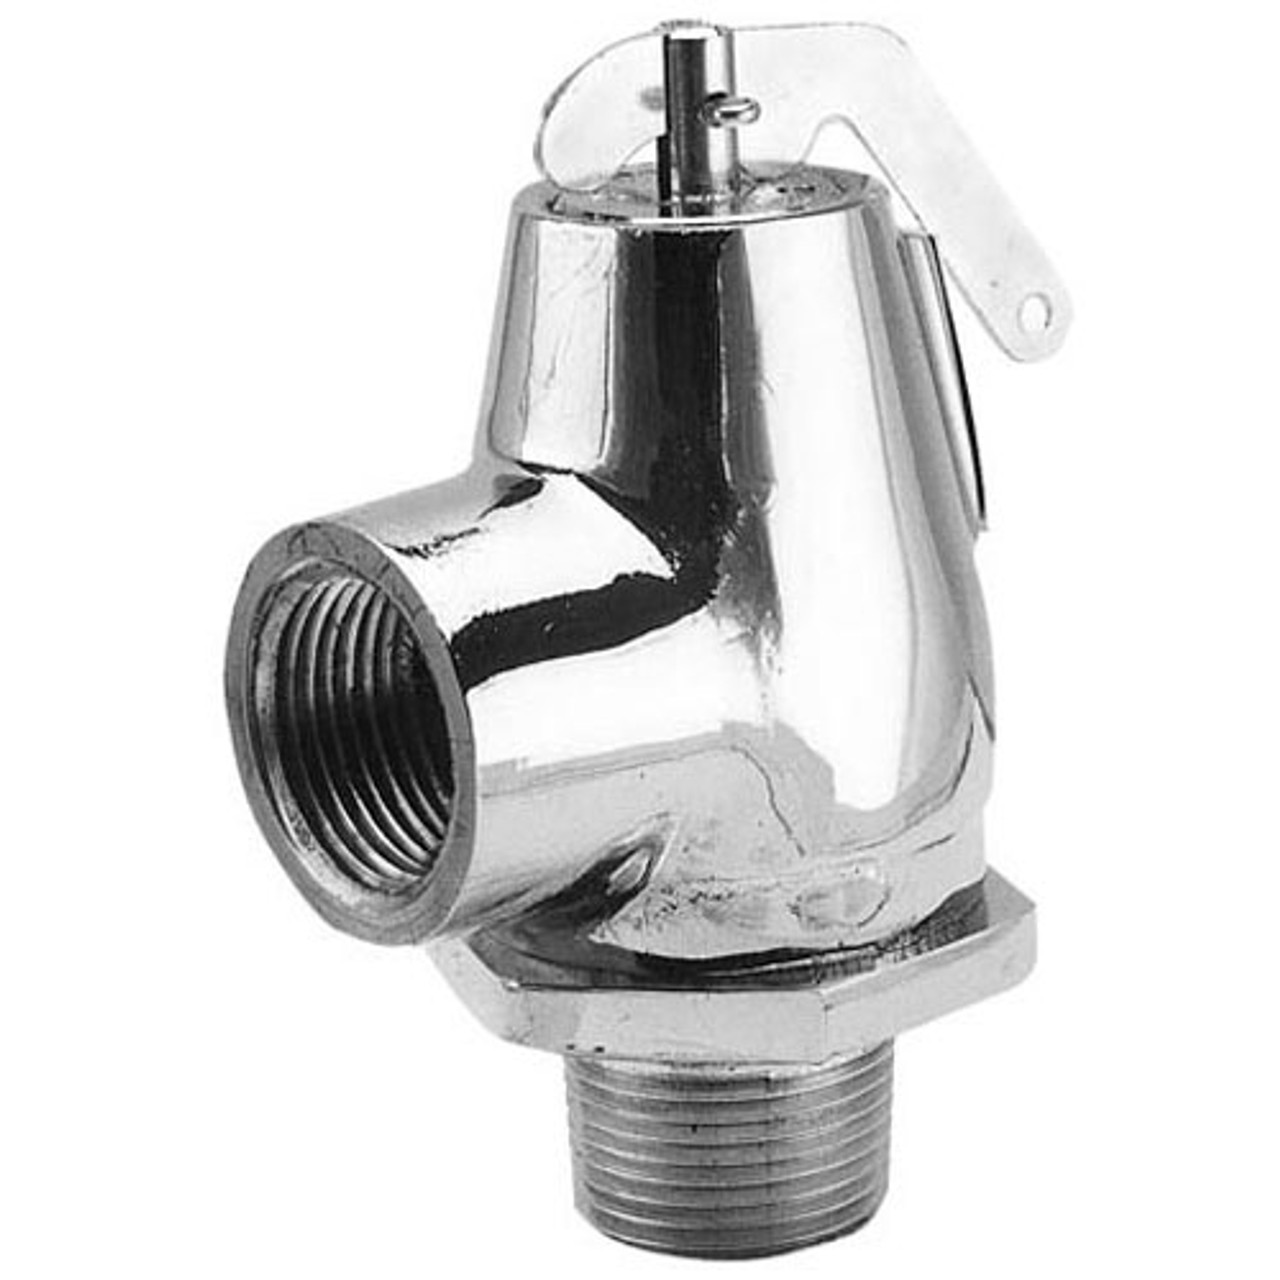 Safety Valve 3/4"M X 3/4"F - Replacement Part For Legion 440170